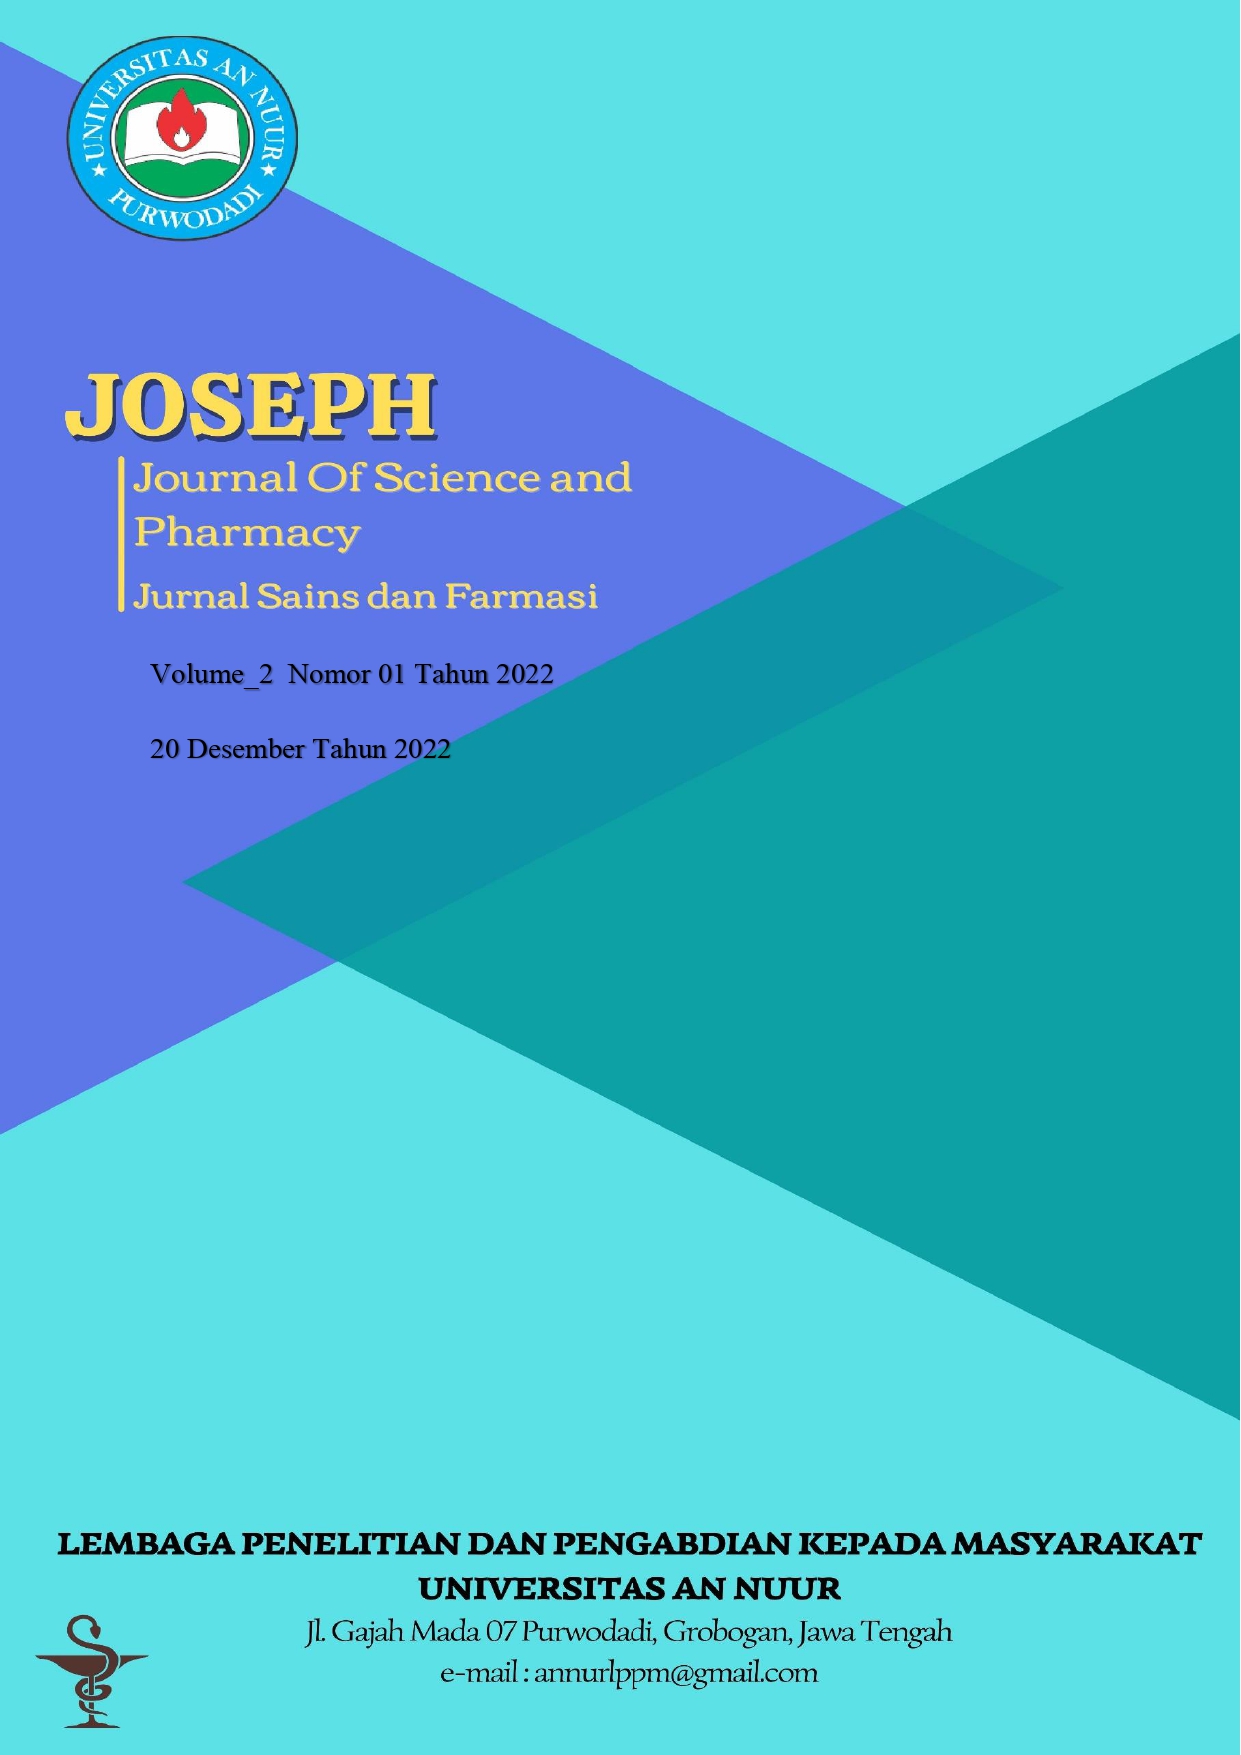 					View Vol. 2 No. 01 (2022): Journal of Science and Pharmacy (Joseph)
				